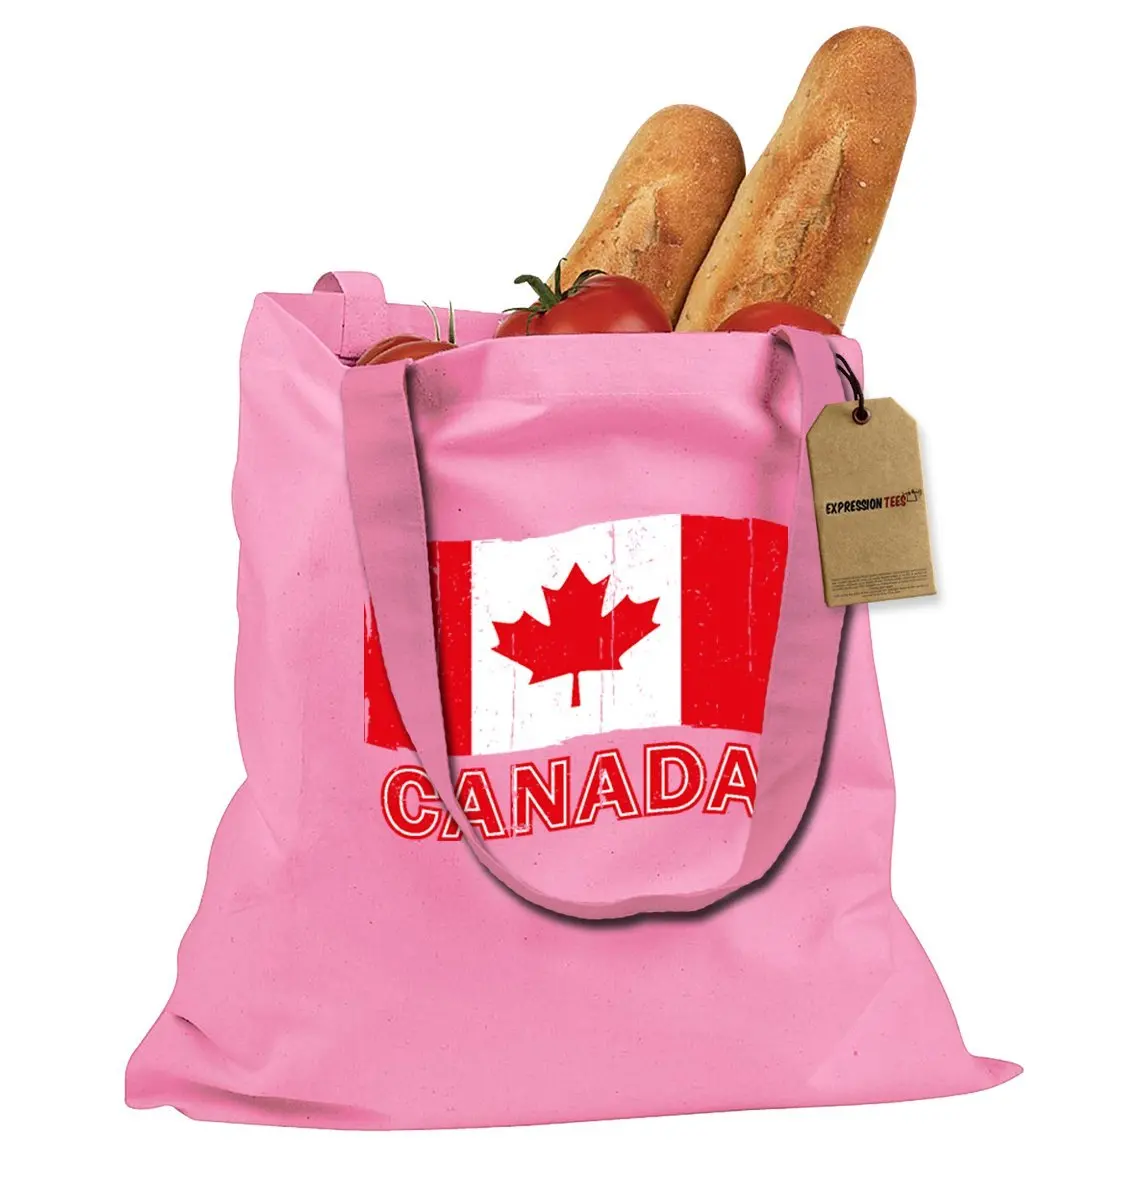 Cheap Shopping Site Canada, find Shopping Site Canada deals on line at 0